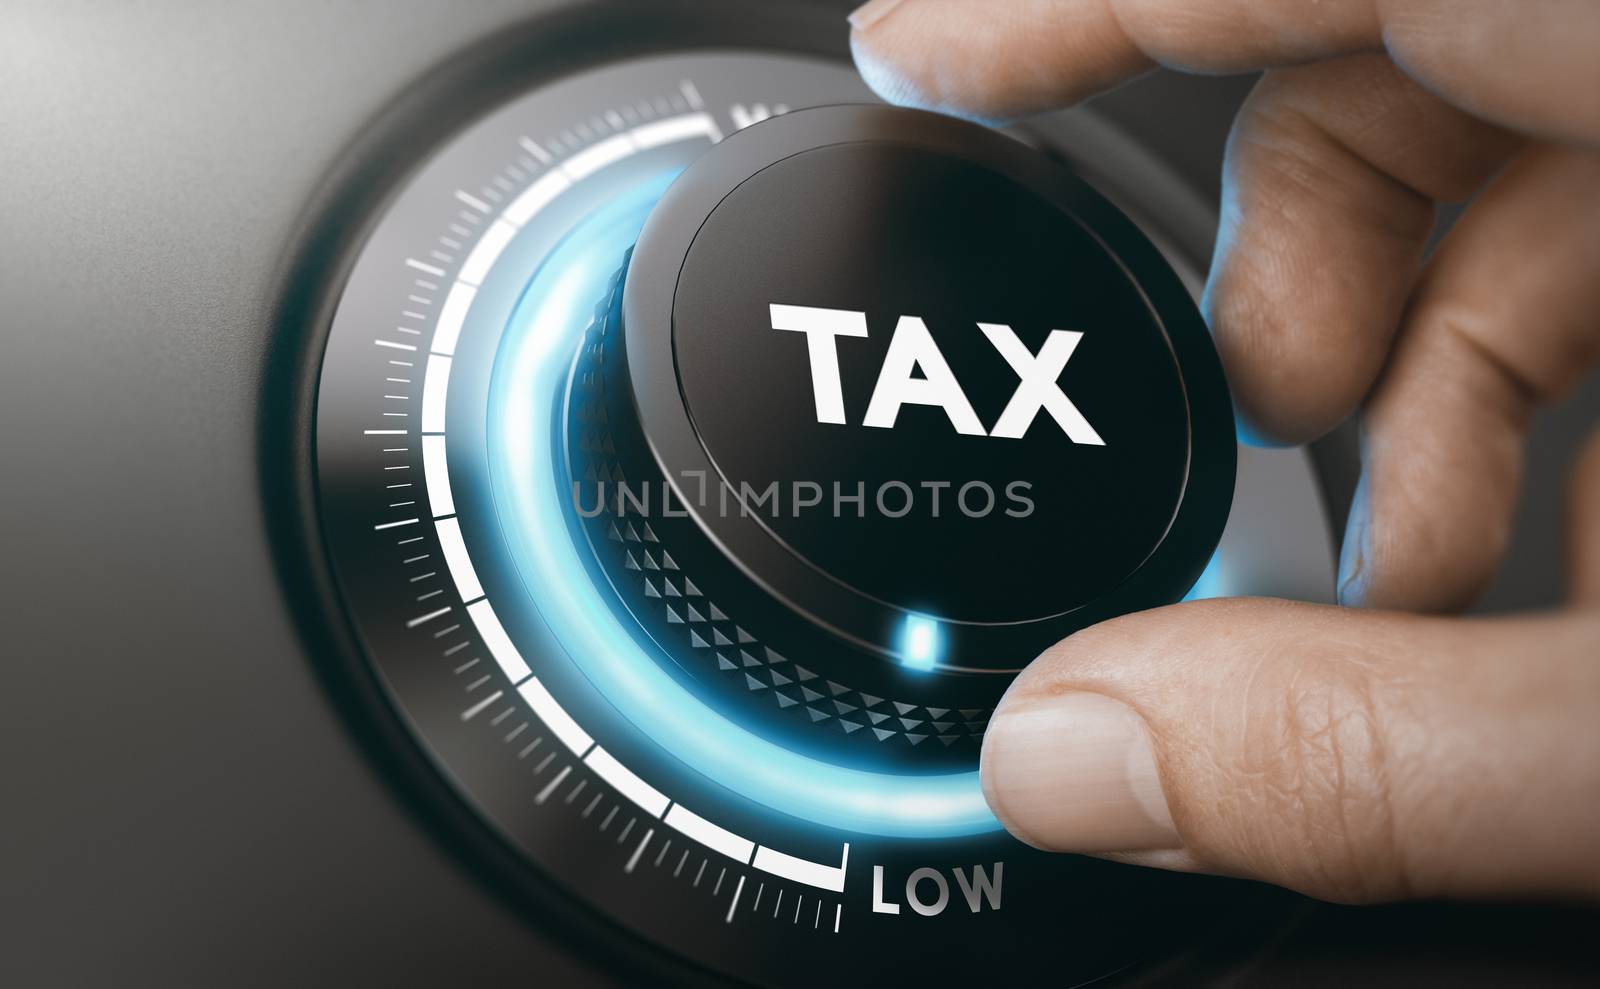 Tax reduction services. Lowering Taxable Income. by Olivier-Le-Moal